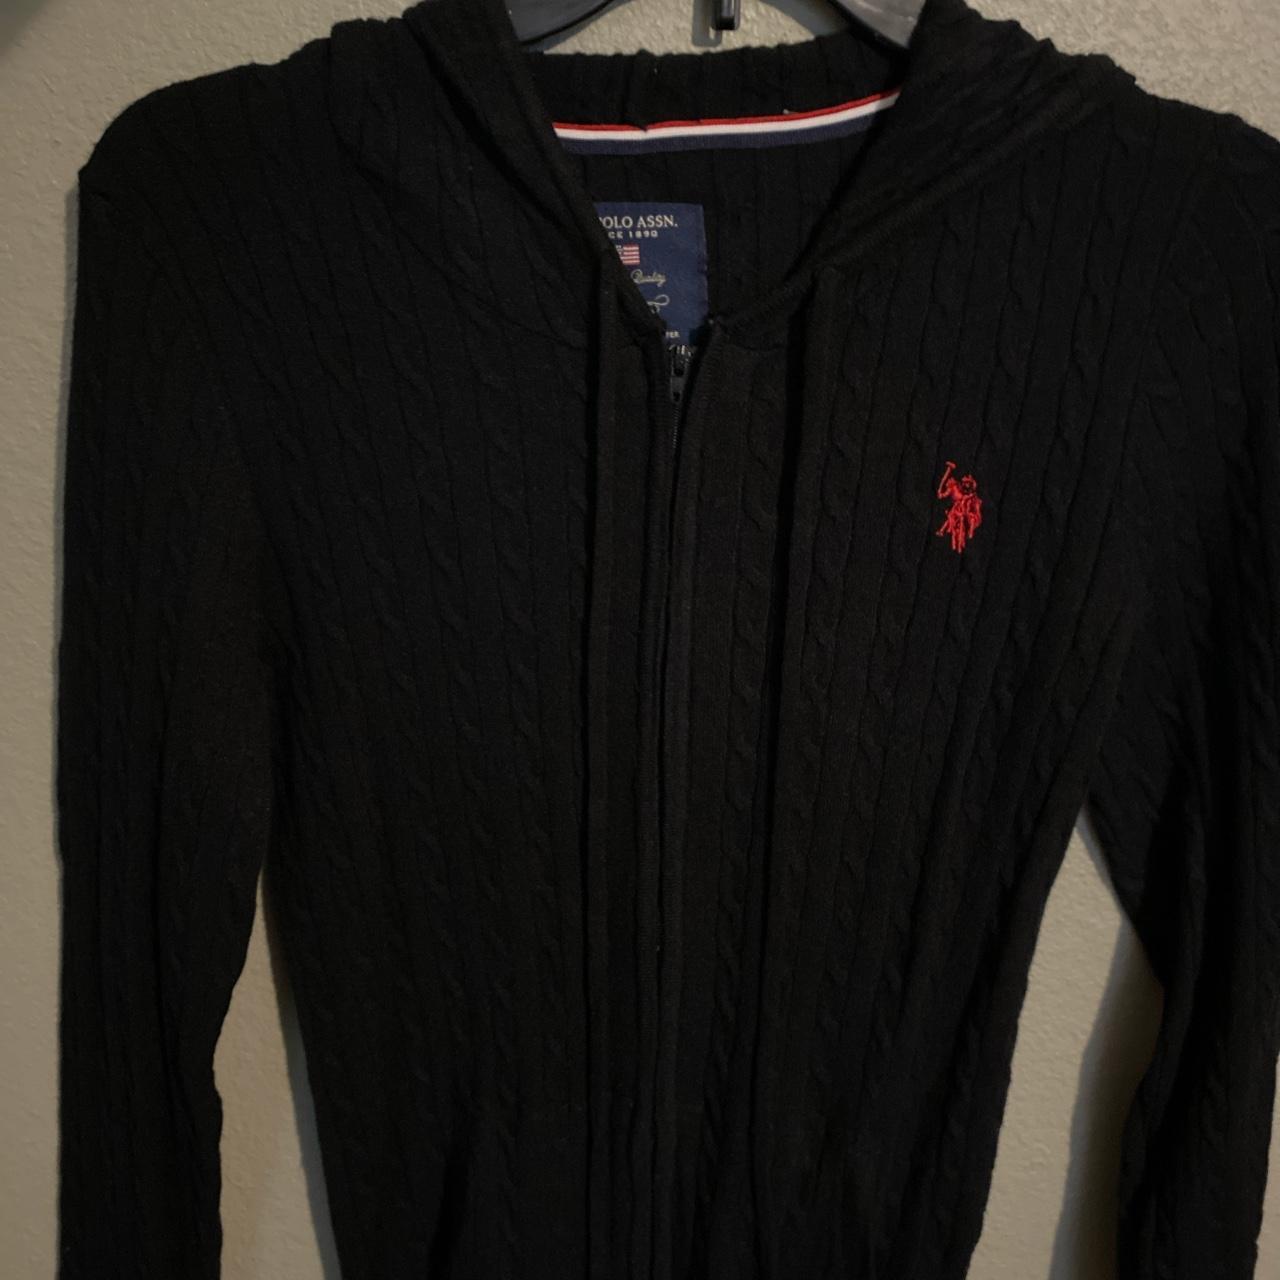 U.S. Polo Assn. Women's Black and Red Jacket